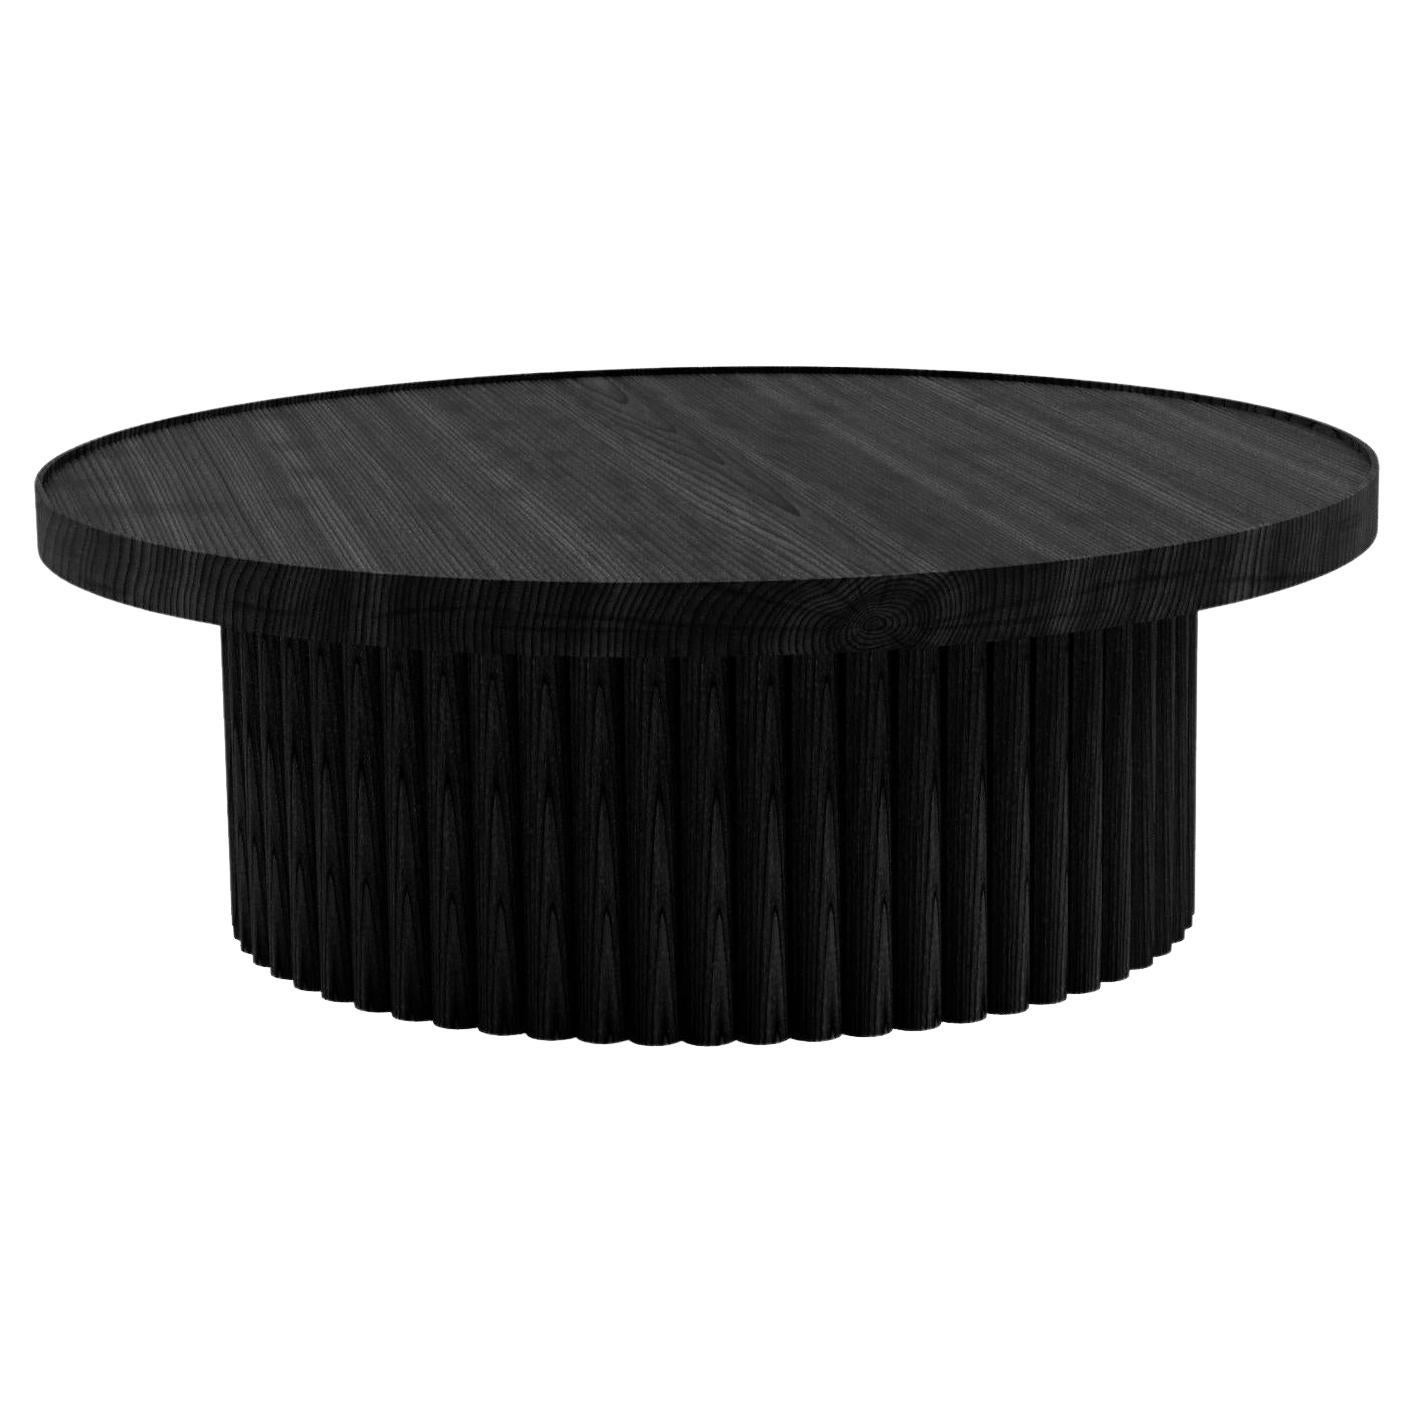 Modern Ebonized Ash Loki Coffee Table from the Signature Series by Pompous Fox